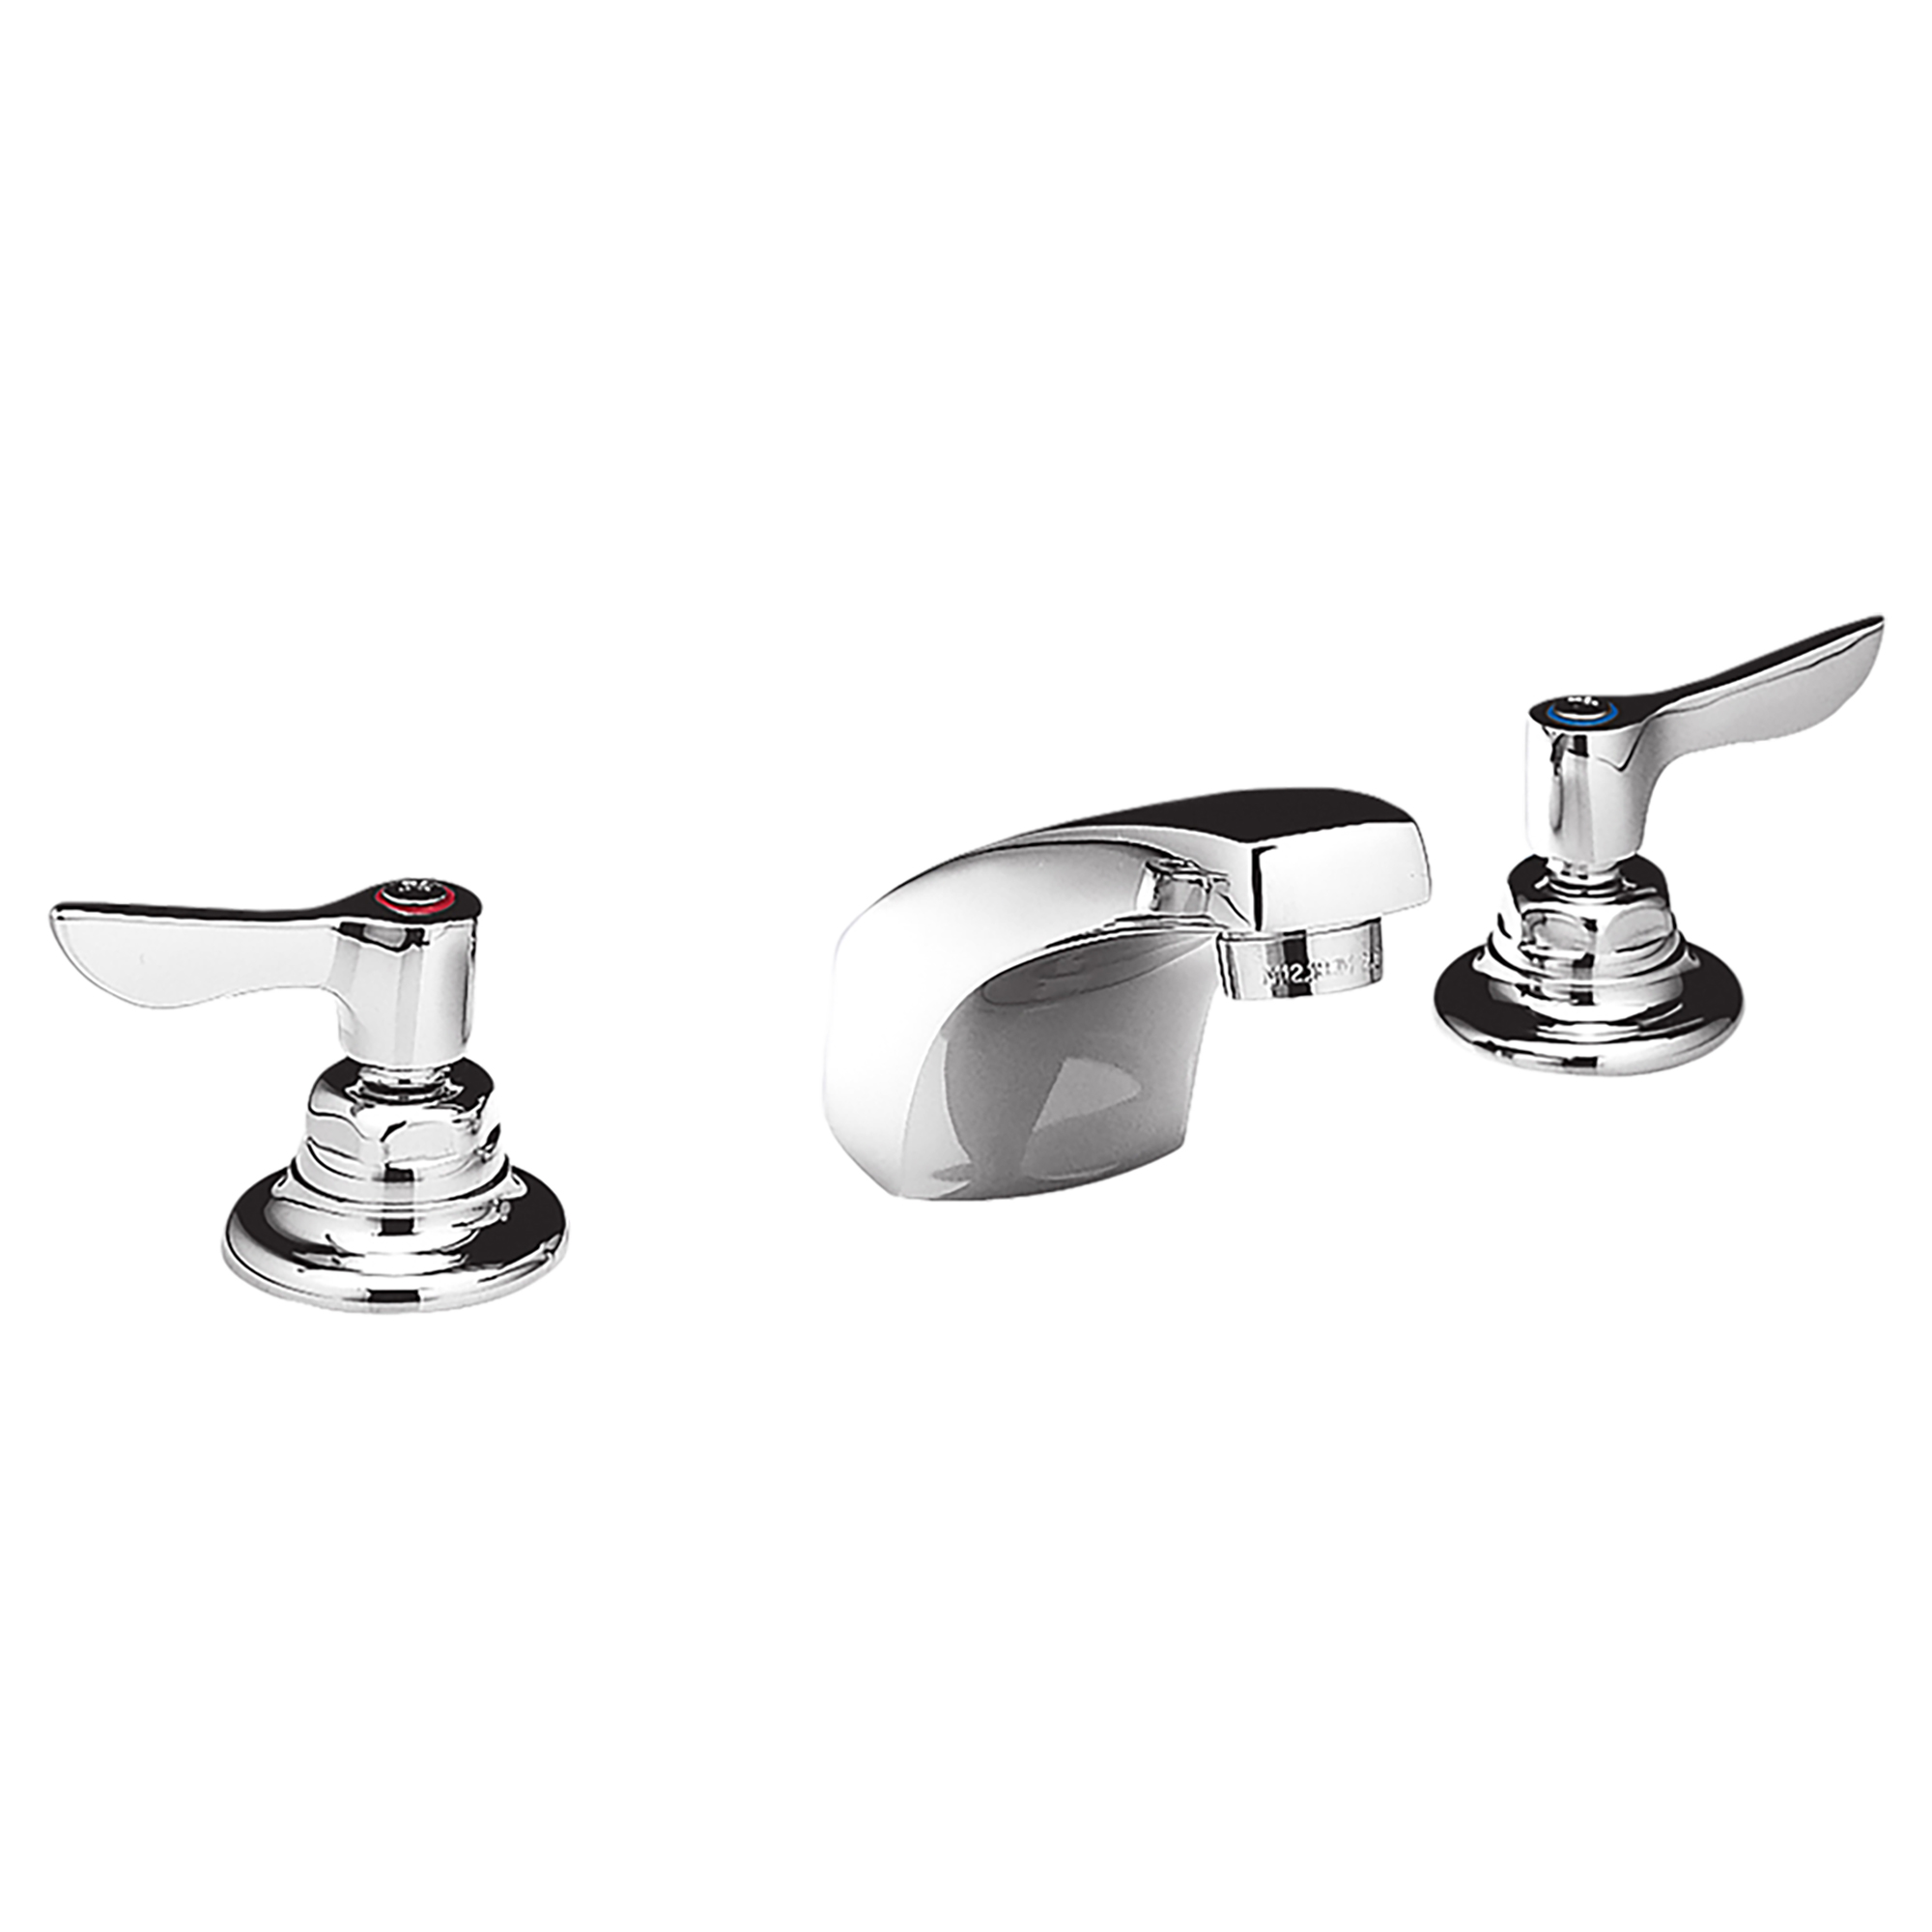 Monterrey™ 8-Inch Widespread Cast Faucet With Lever Handles 1.5 gpm/5.7 Lpm